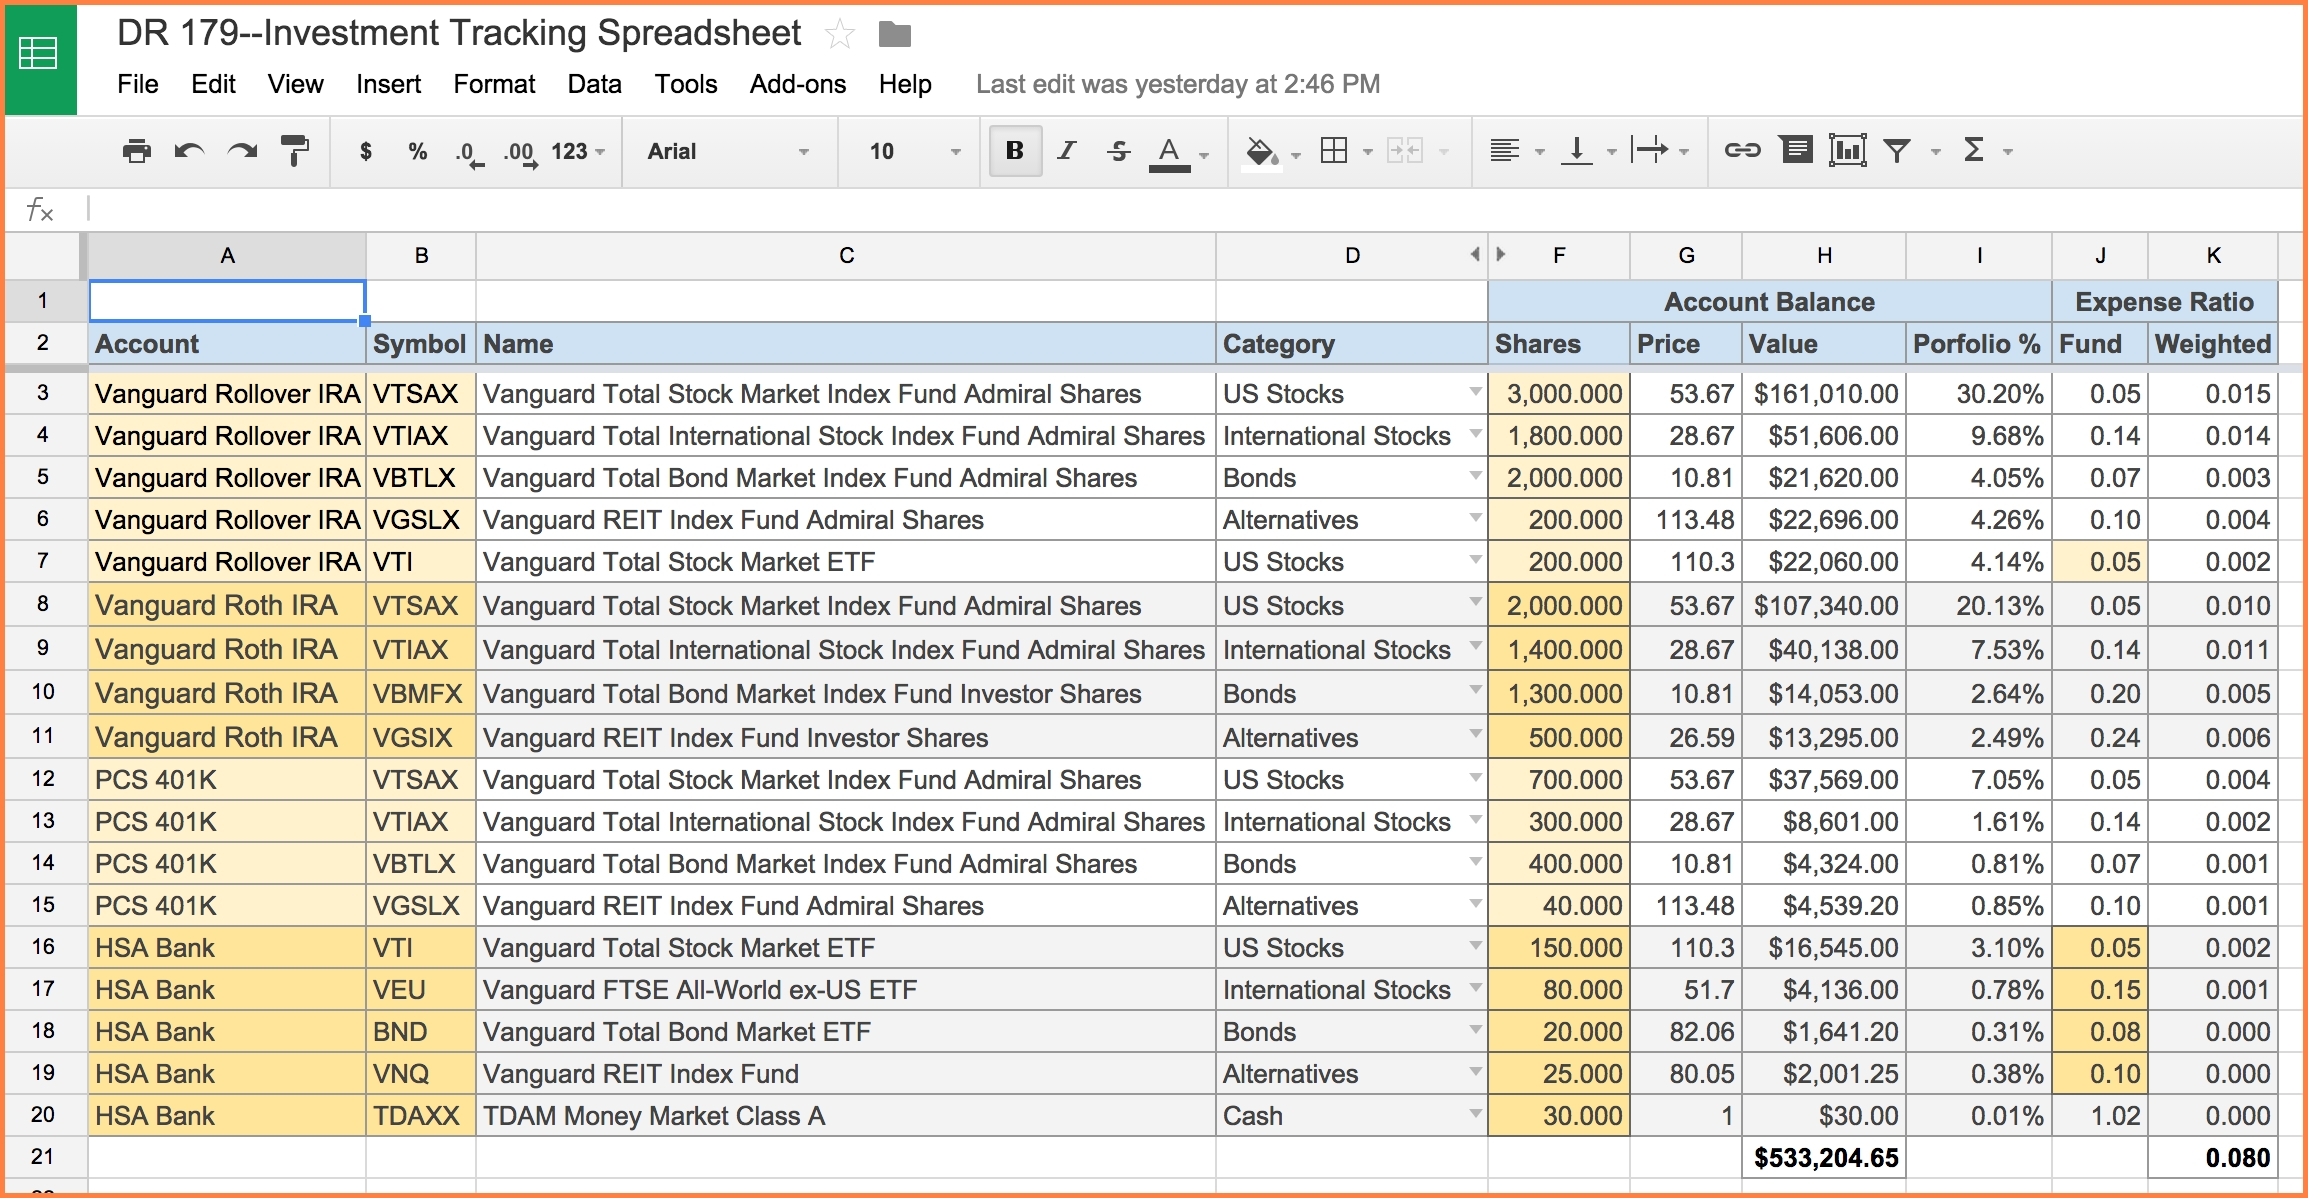 4 Church Accounting Spreadsheet Templates | Excel Spreadsheets Group Within Church Accounting Spreadsheet Templates